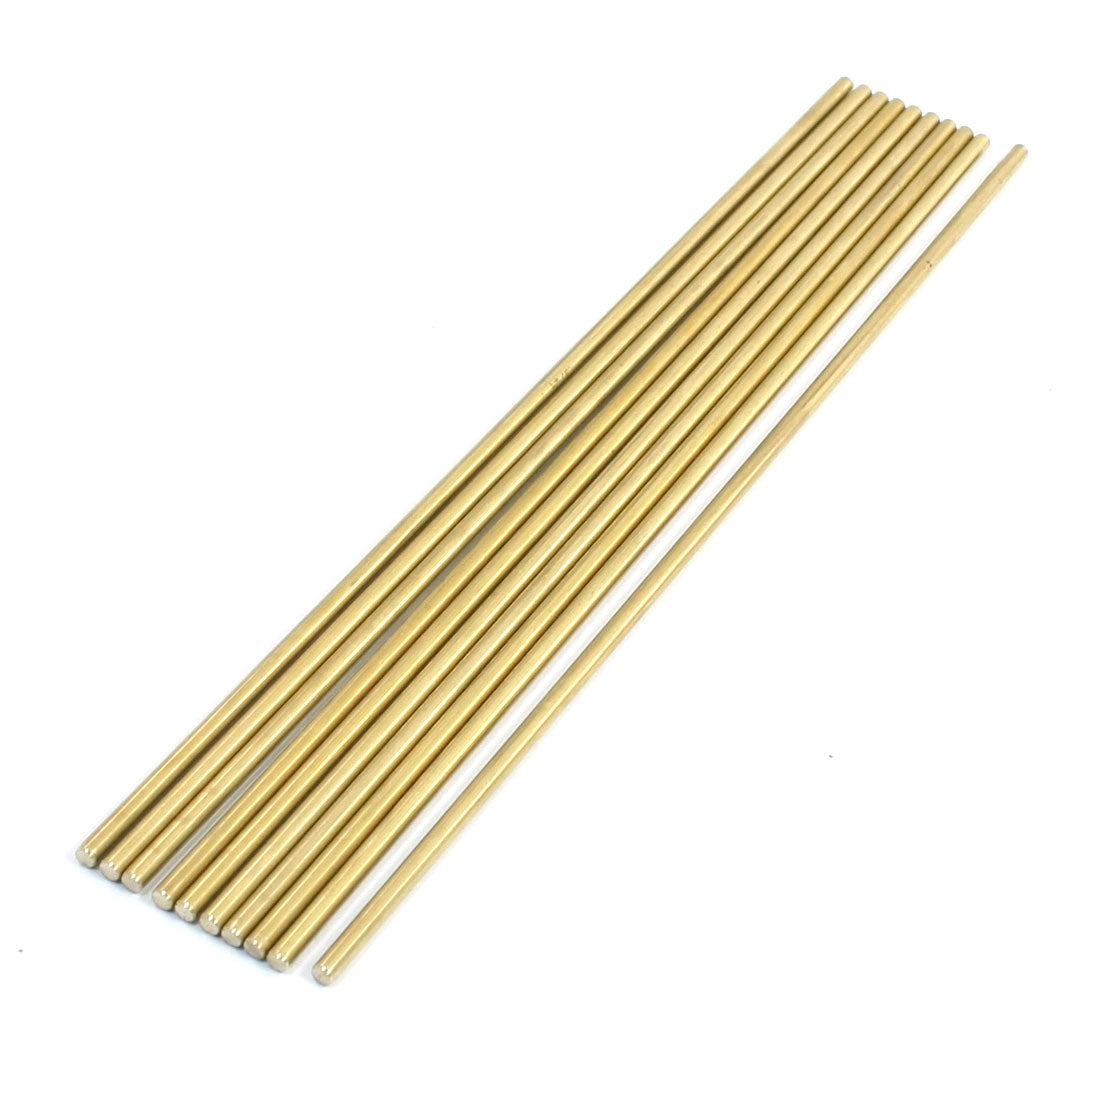 uxcell Uxcell Lathe 200mm x 3mm Brass Axle Round Stock Drill Rod Bar 10Pcs